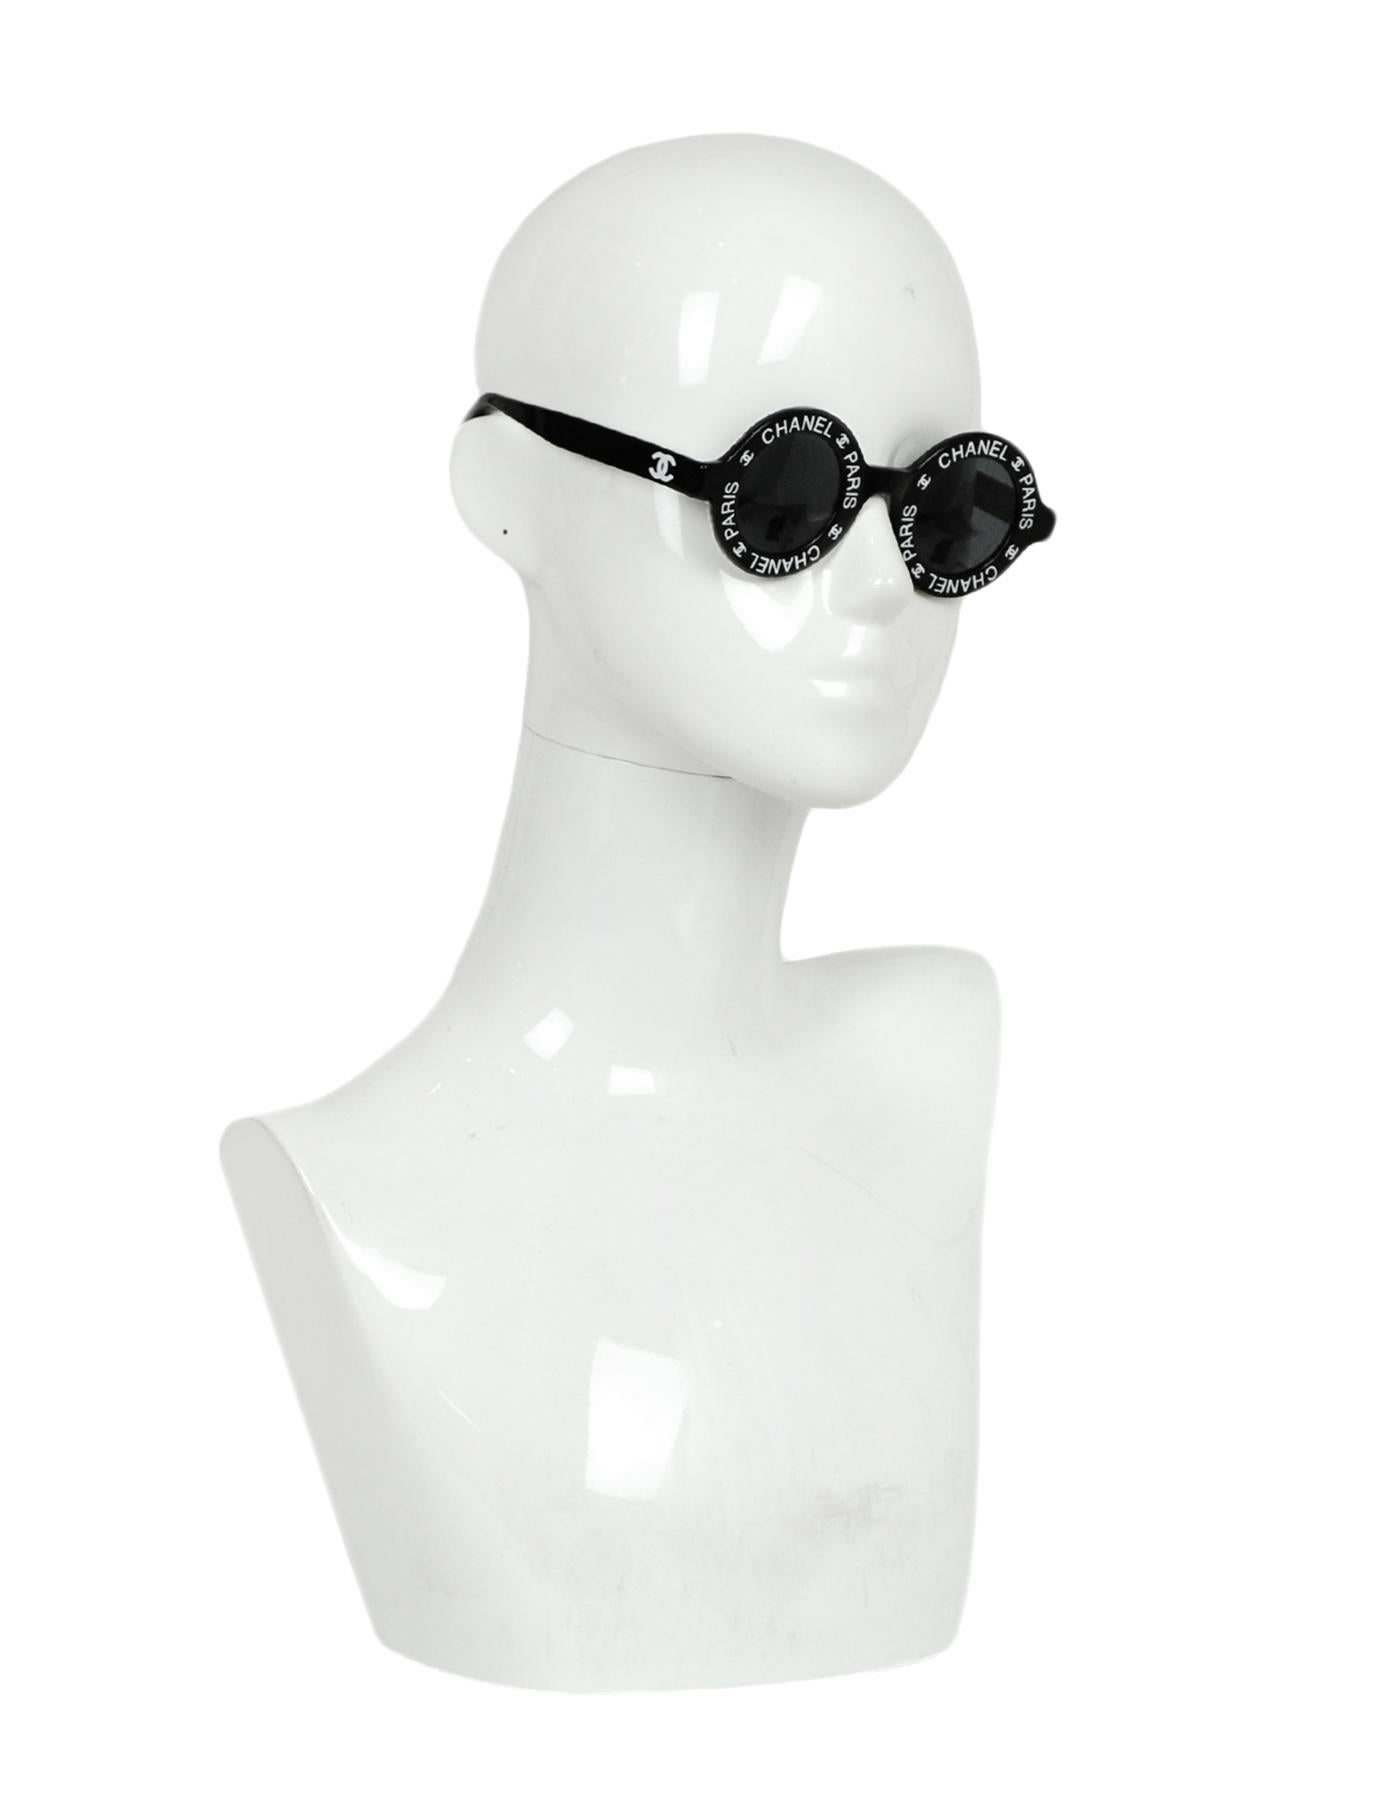 Chanel Black/White 1993 Vintage Runway Round CHANEL PARIS Sunglasses

Made In: Italy
Year of Production: 1993
Color: Black and white
Materials: Acetate 
Overall Condition: Excellent pre-owned condition
Includes: Chanel case and box


Measurements: